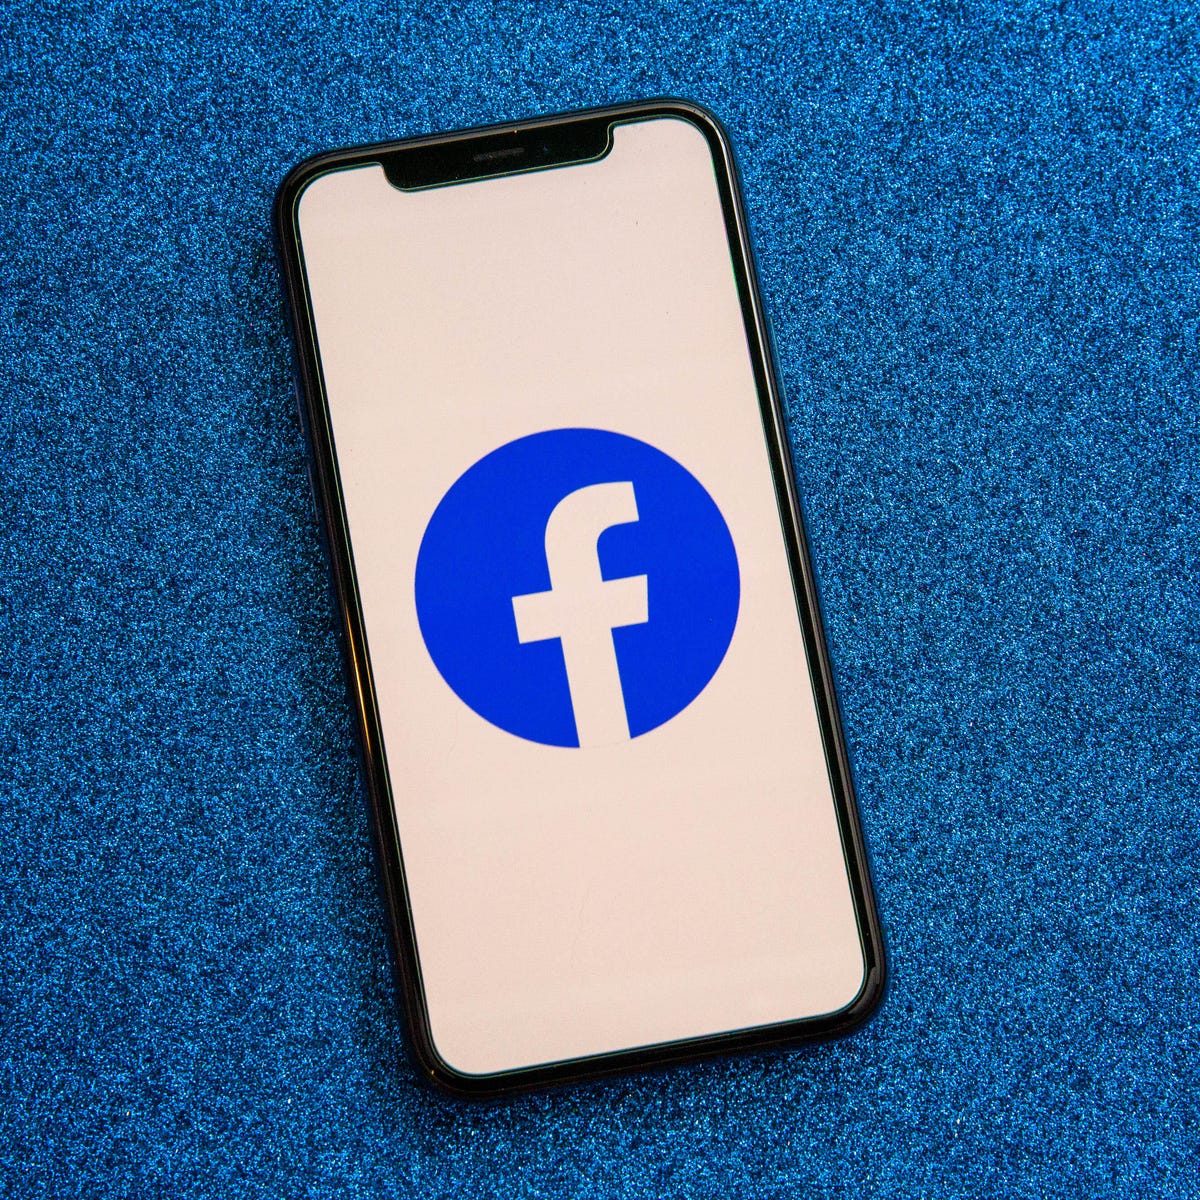 Deleting Facebook? Follow These Steps Carefully - CNET